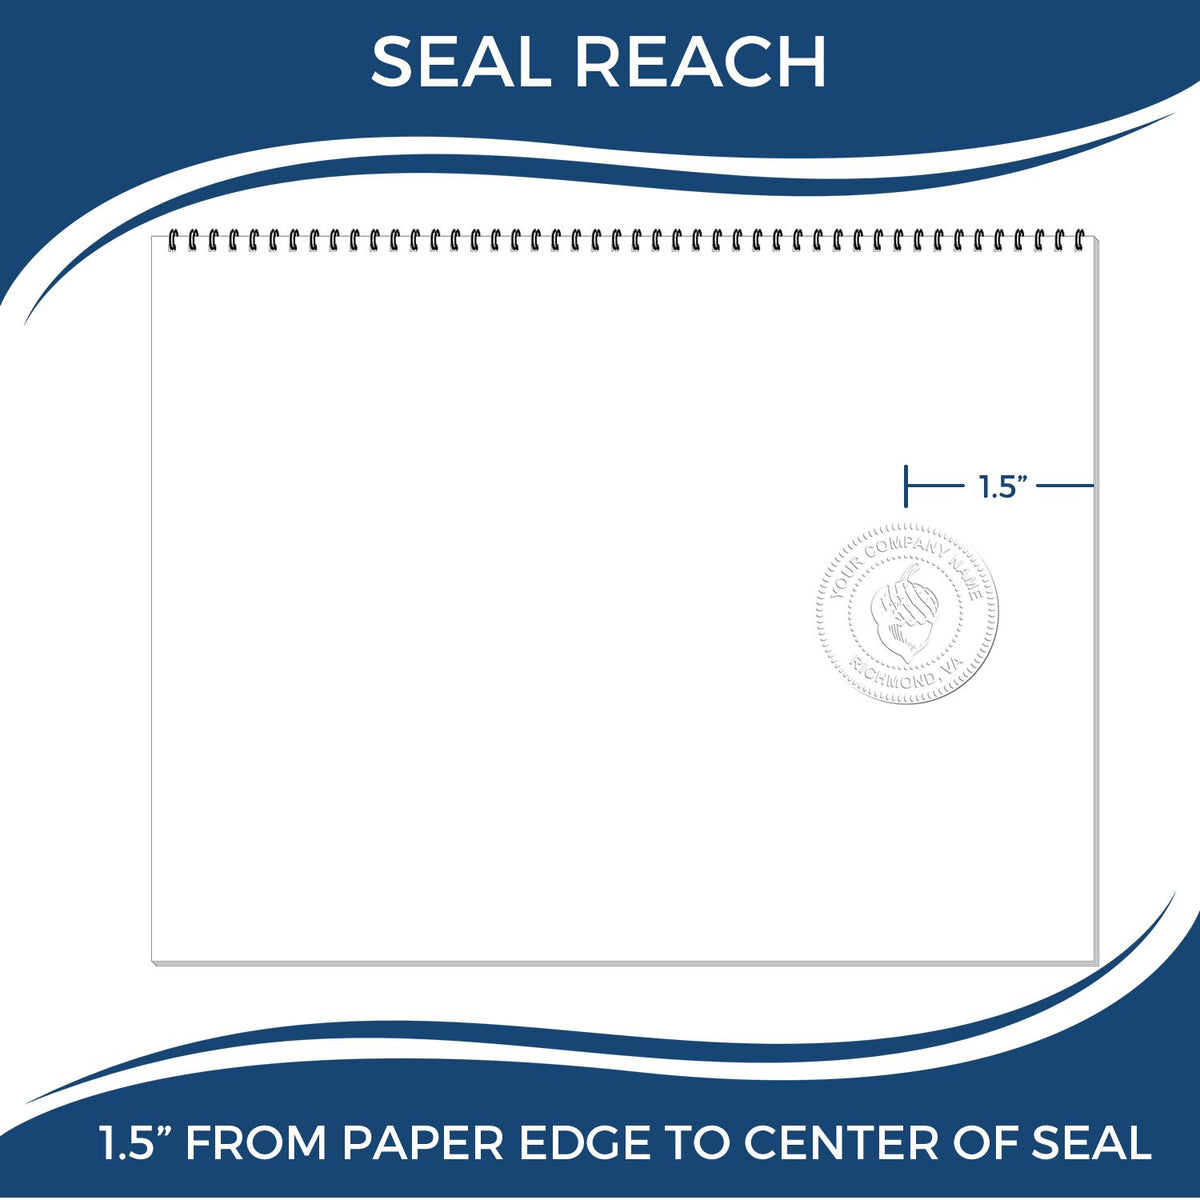 An infographic showing the seal reach which is represented by a ruler and a miniature seal image of the Hybrid Minnesota Land Surveyor Seal